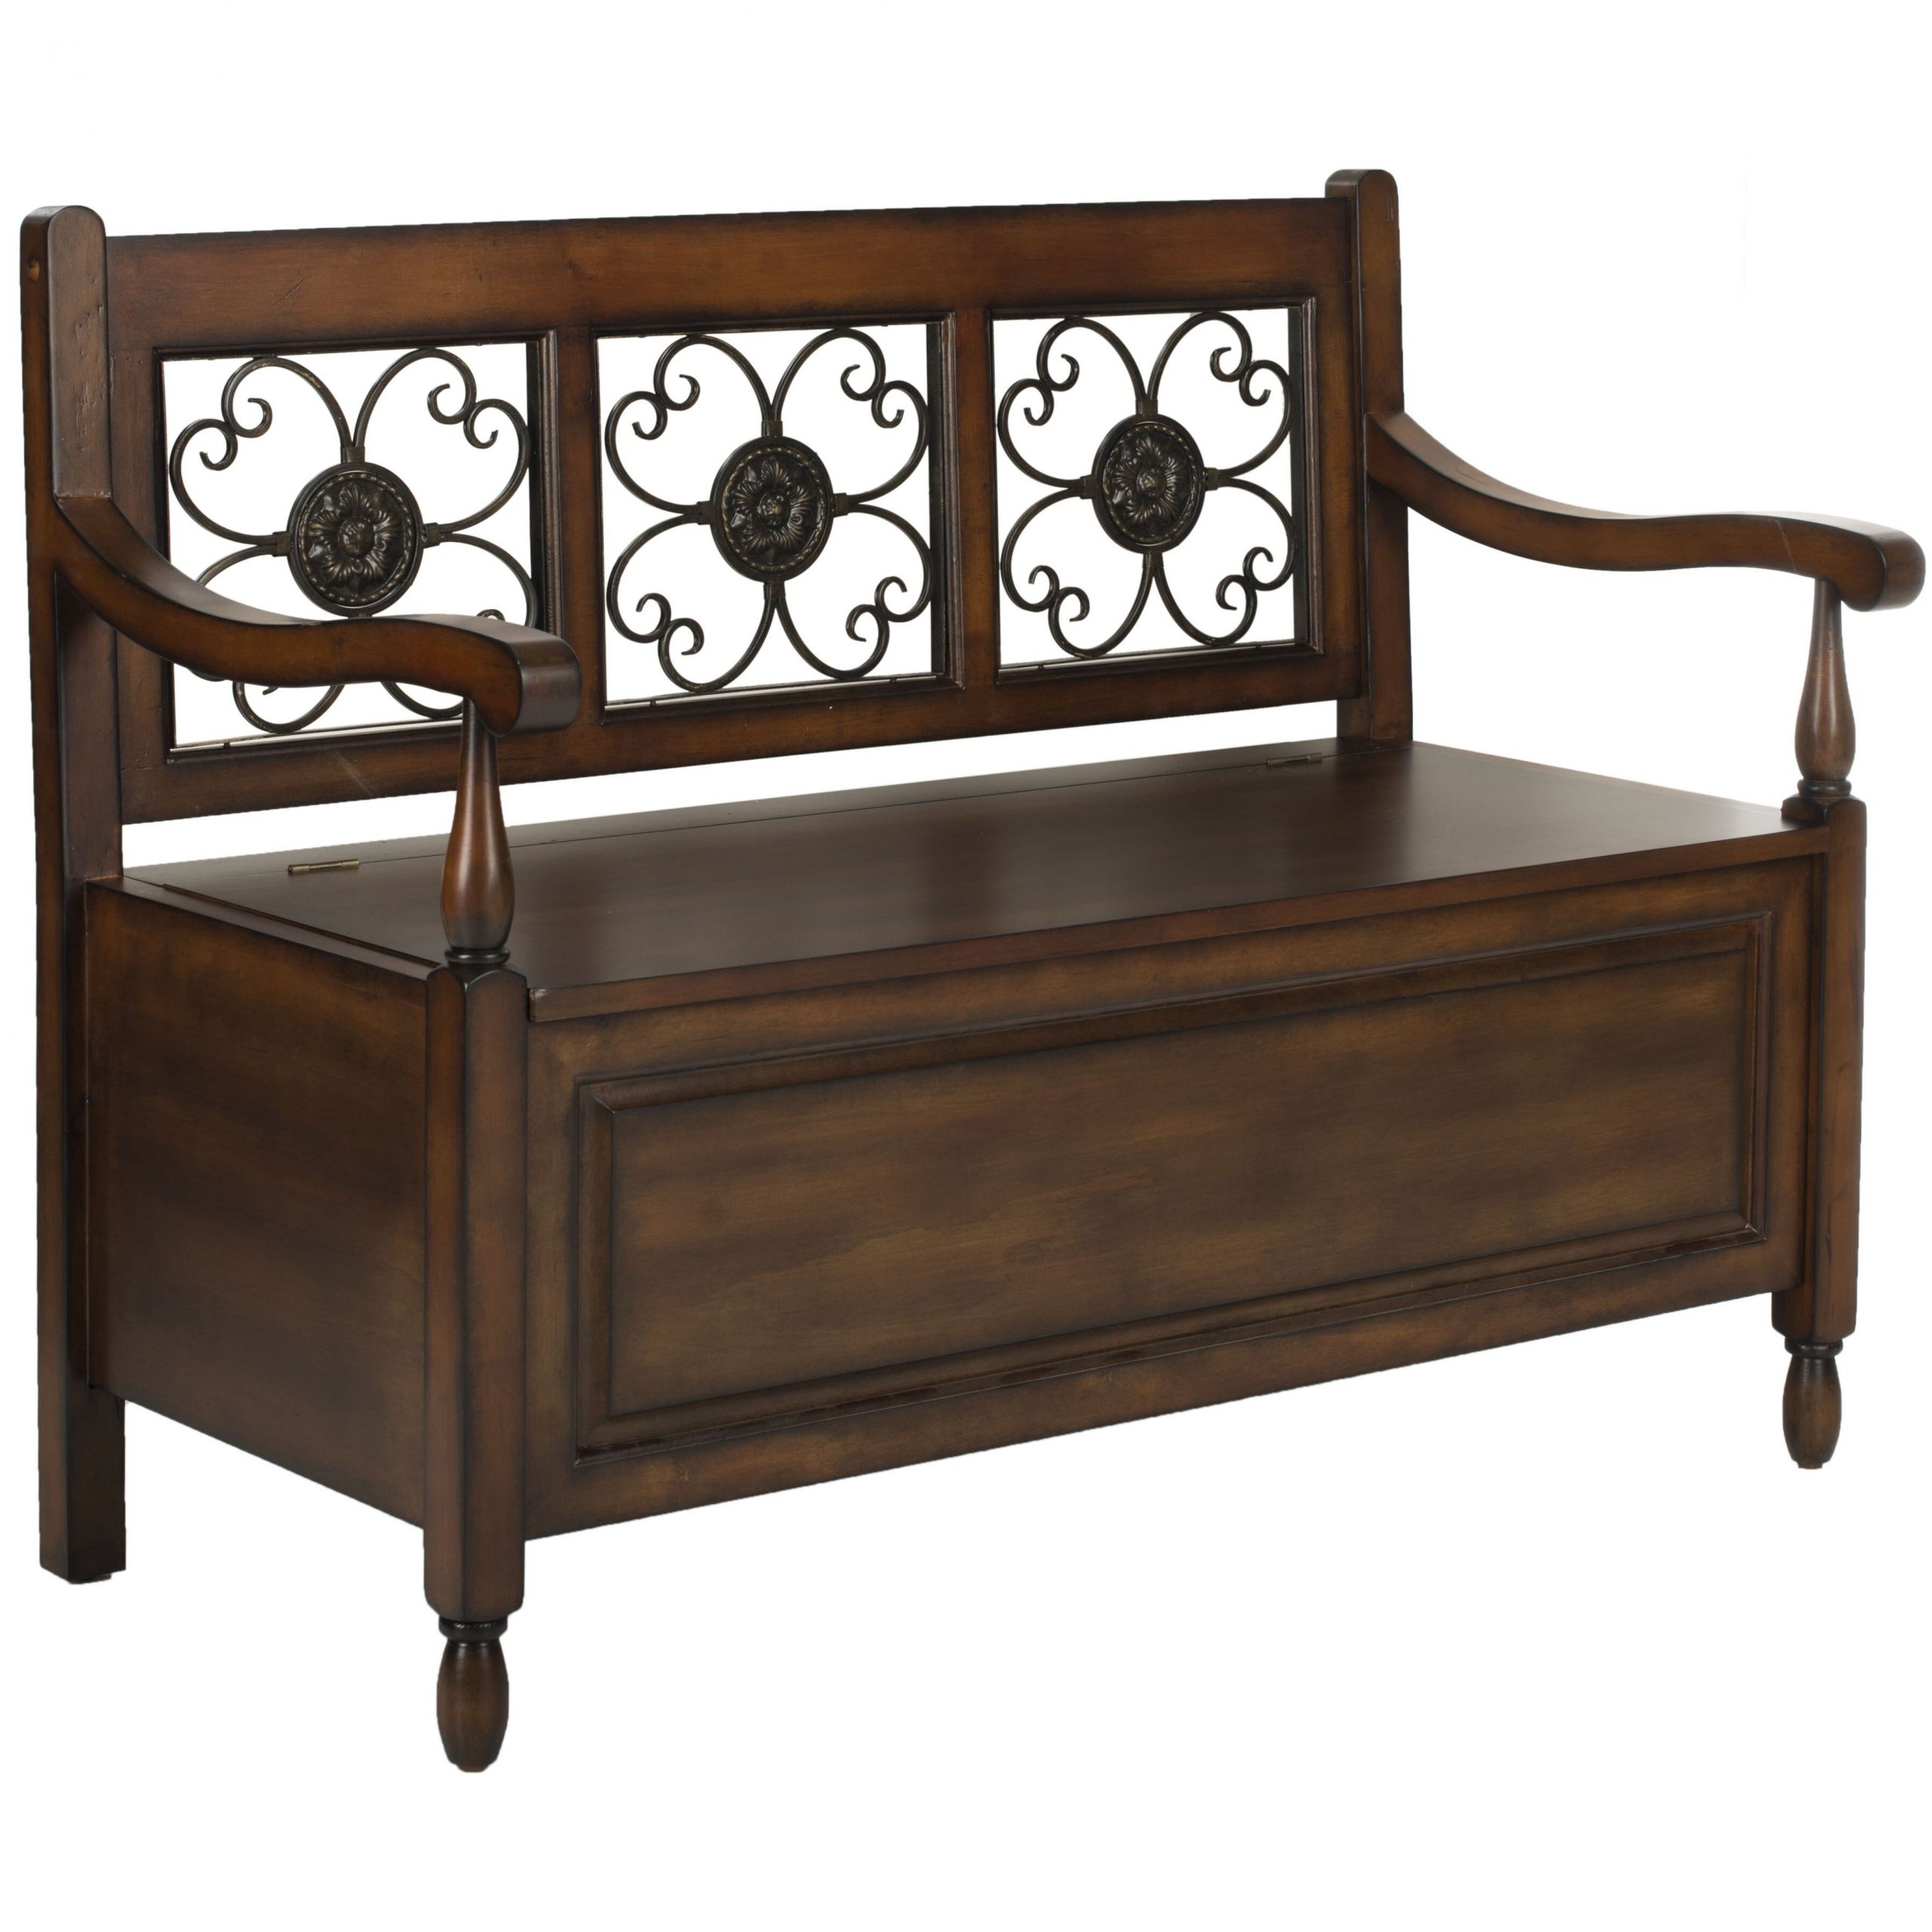 Entry Bench With Storage
 Safavieh Erica Wood Storage Entryway Bench & Reviews